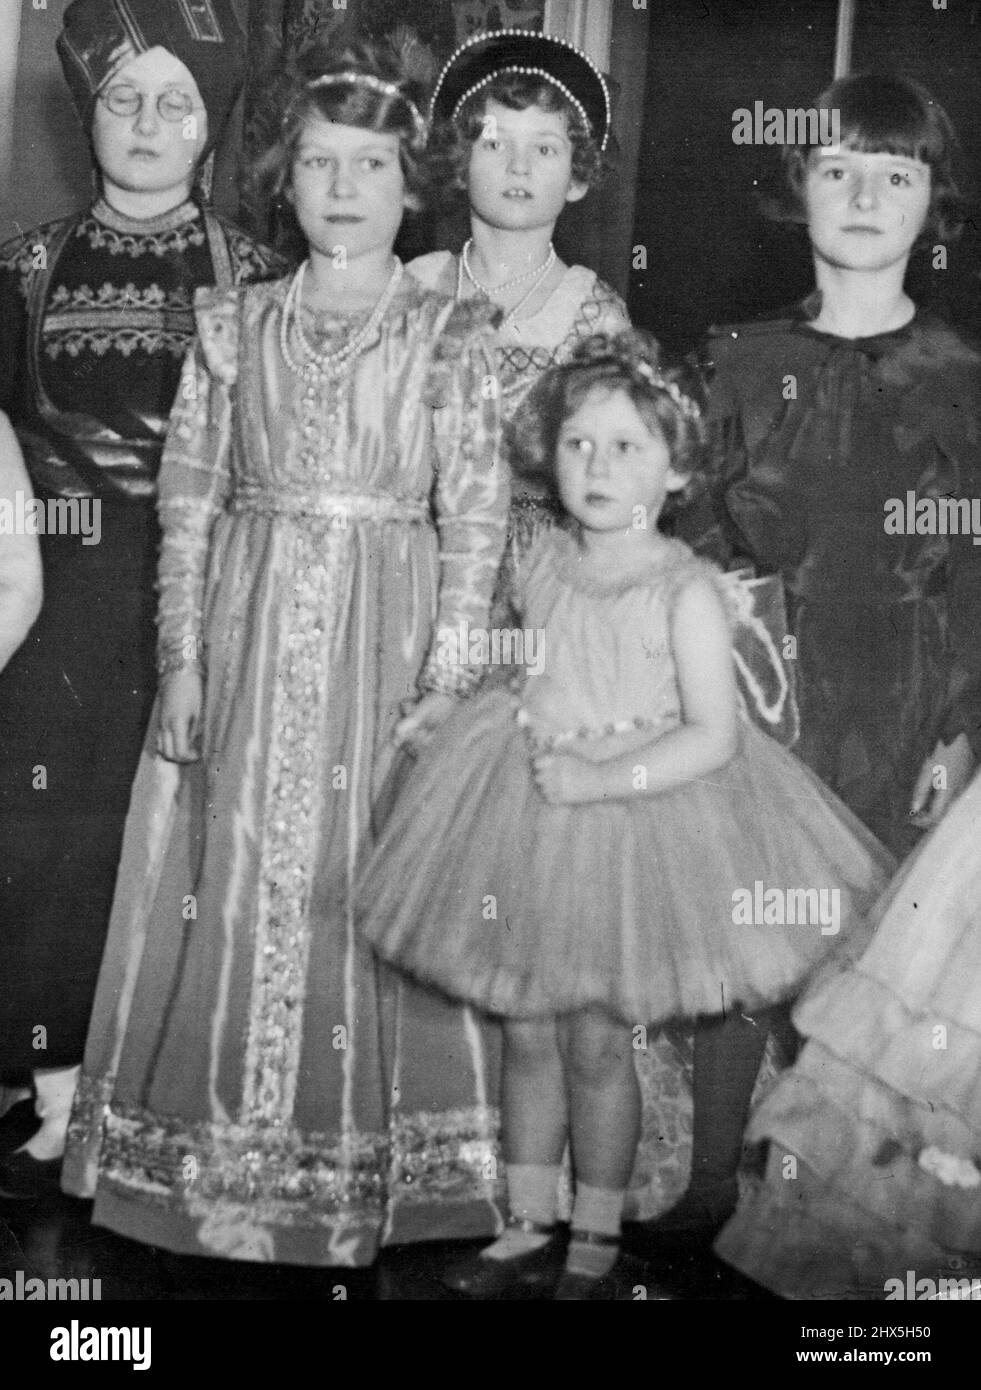 Princess Elizabeth Future Queen Of England Was Almost Eight Years Old. Princess Elizabeth dressed in Tudor costume, photographed with some of her friends at a fancy-dress party given in London by lady Astor, about two months before Princess Elizabeth's eight birthday. November 01, 1945. Stock Photo